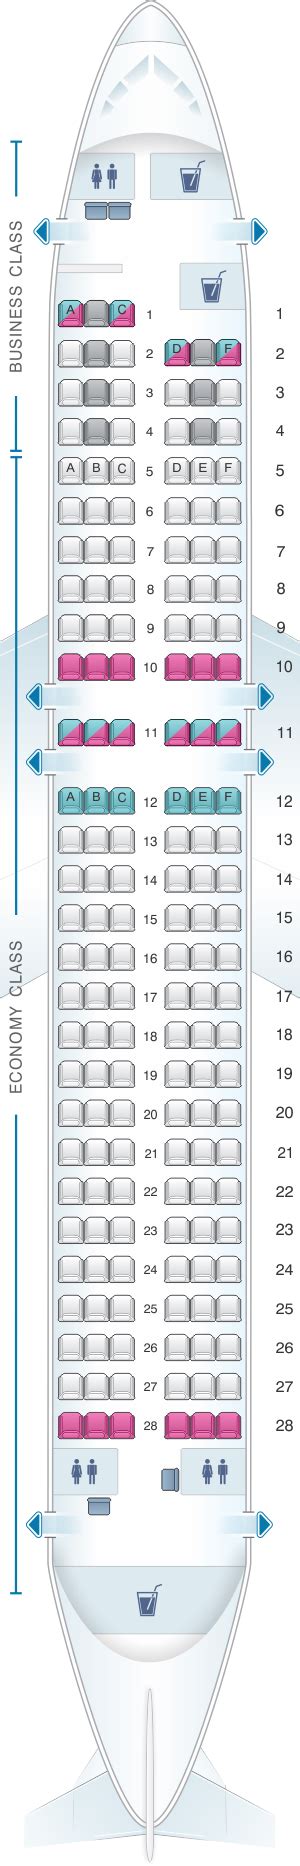 Airbus A320 Seating Map United Awesome Home